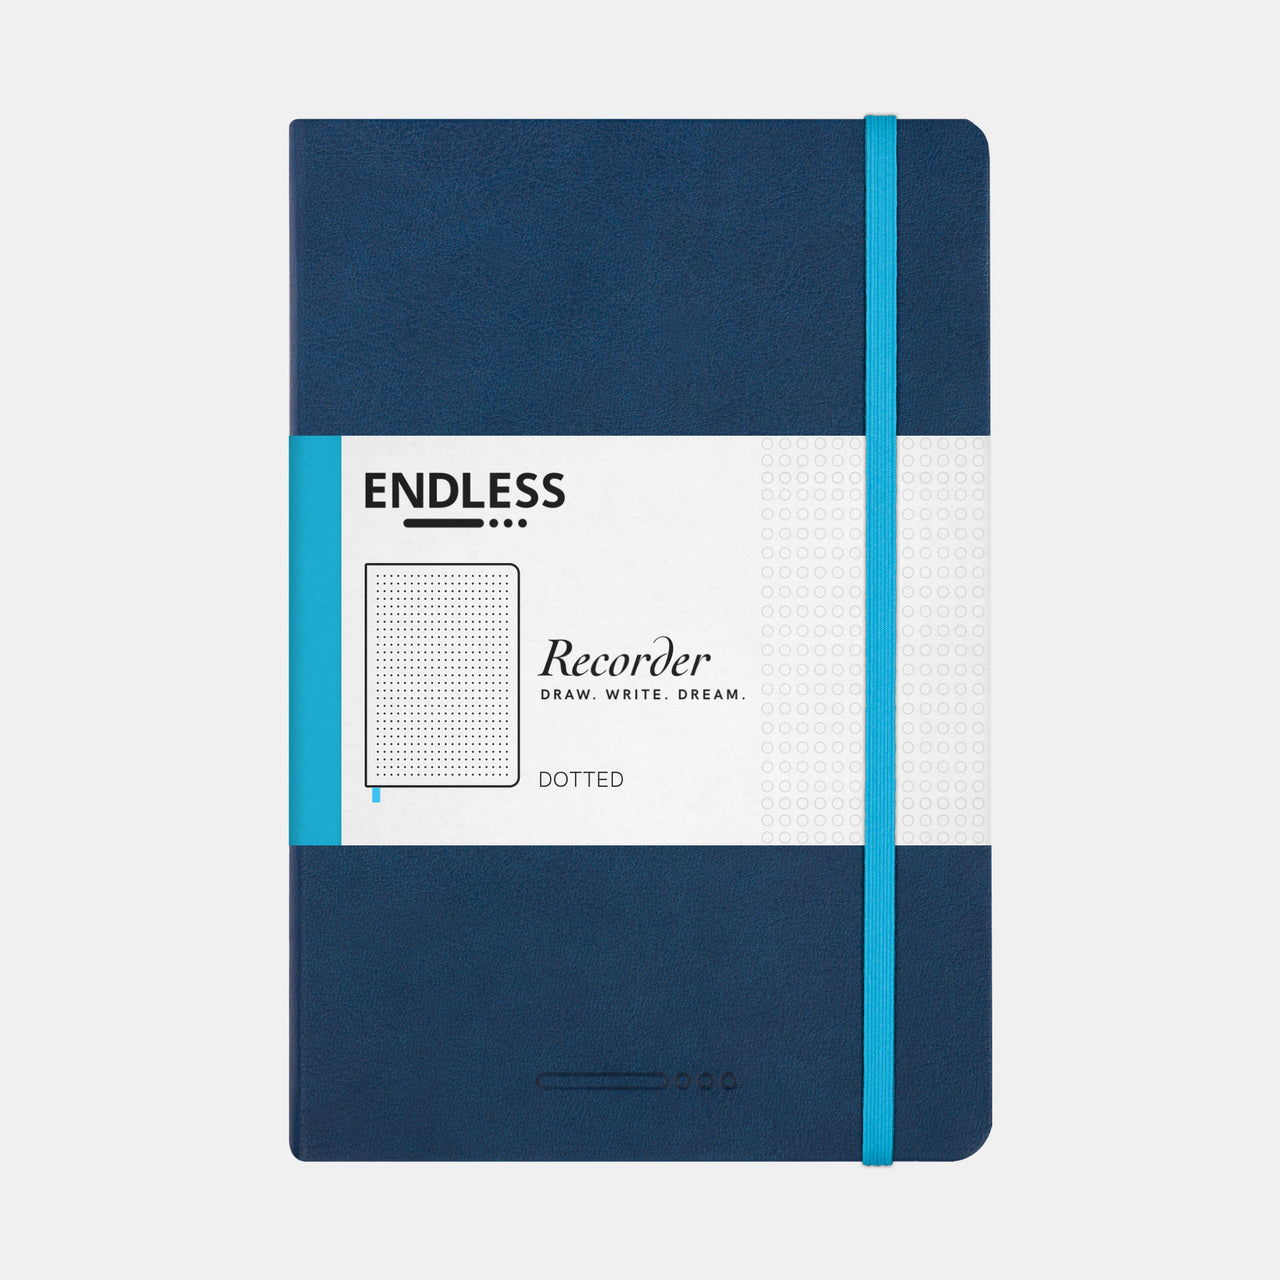 The Endless Recorder is here! It is our new favorite at Two Hands Paperie!
